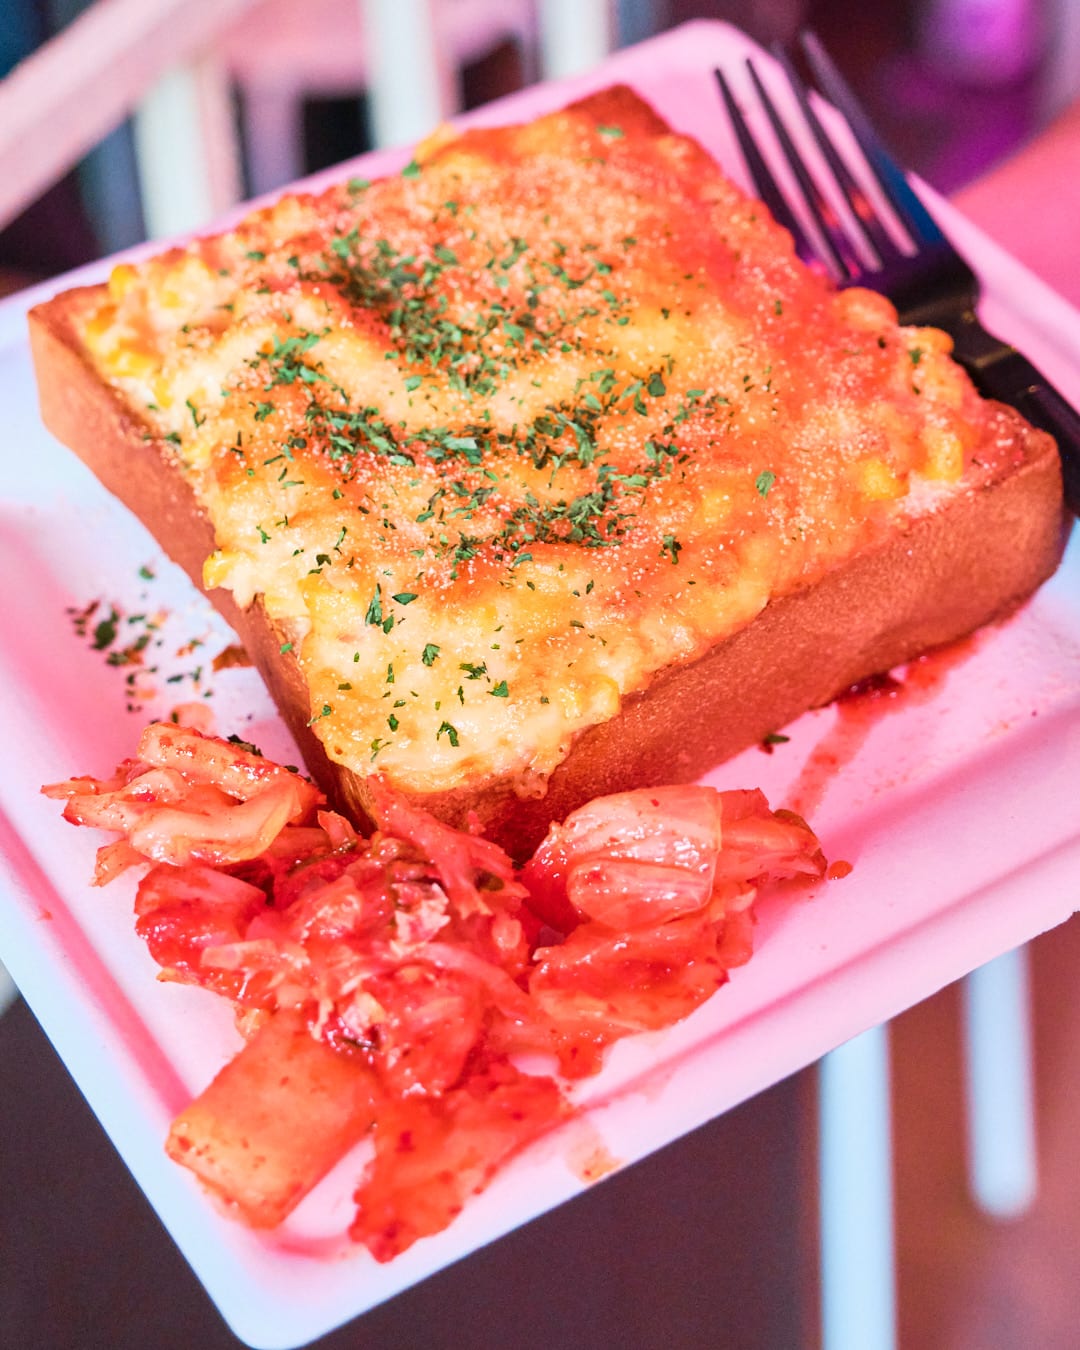 Slice of toast covered in egg and corn with side of kimchi.